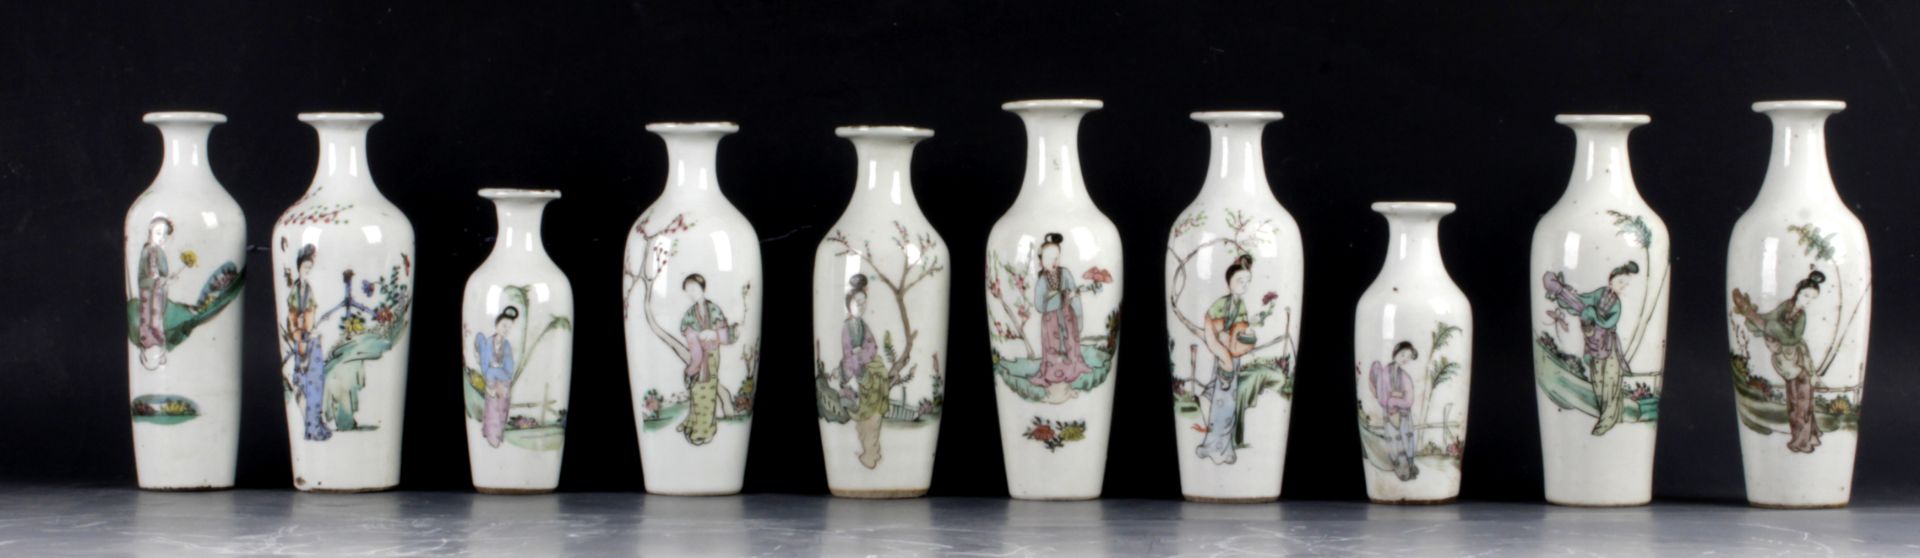 A collection of 10 Chinese porcelain vases from the Republic period - Image 2 of 4